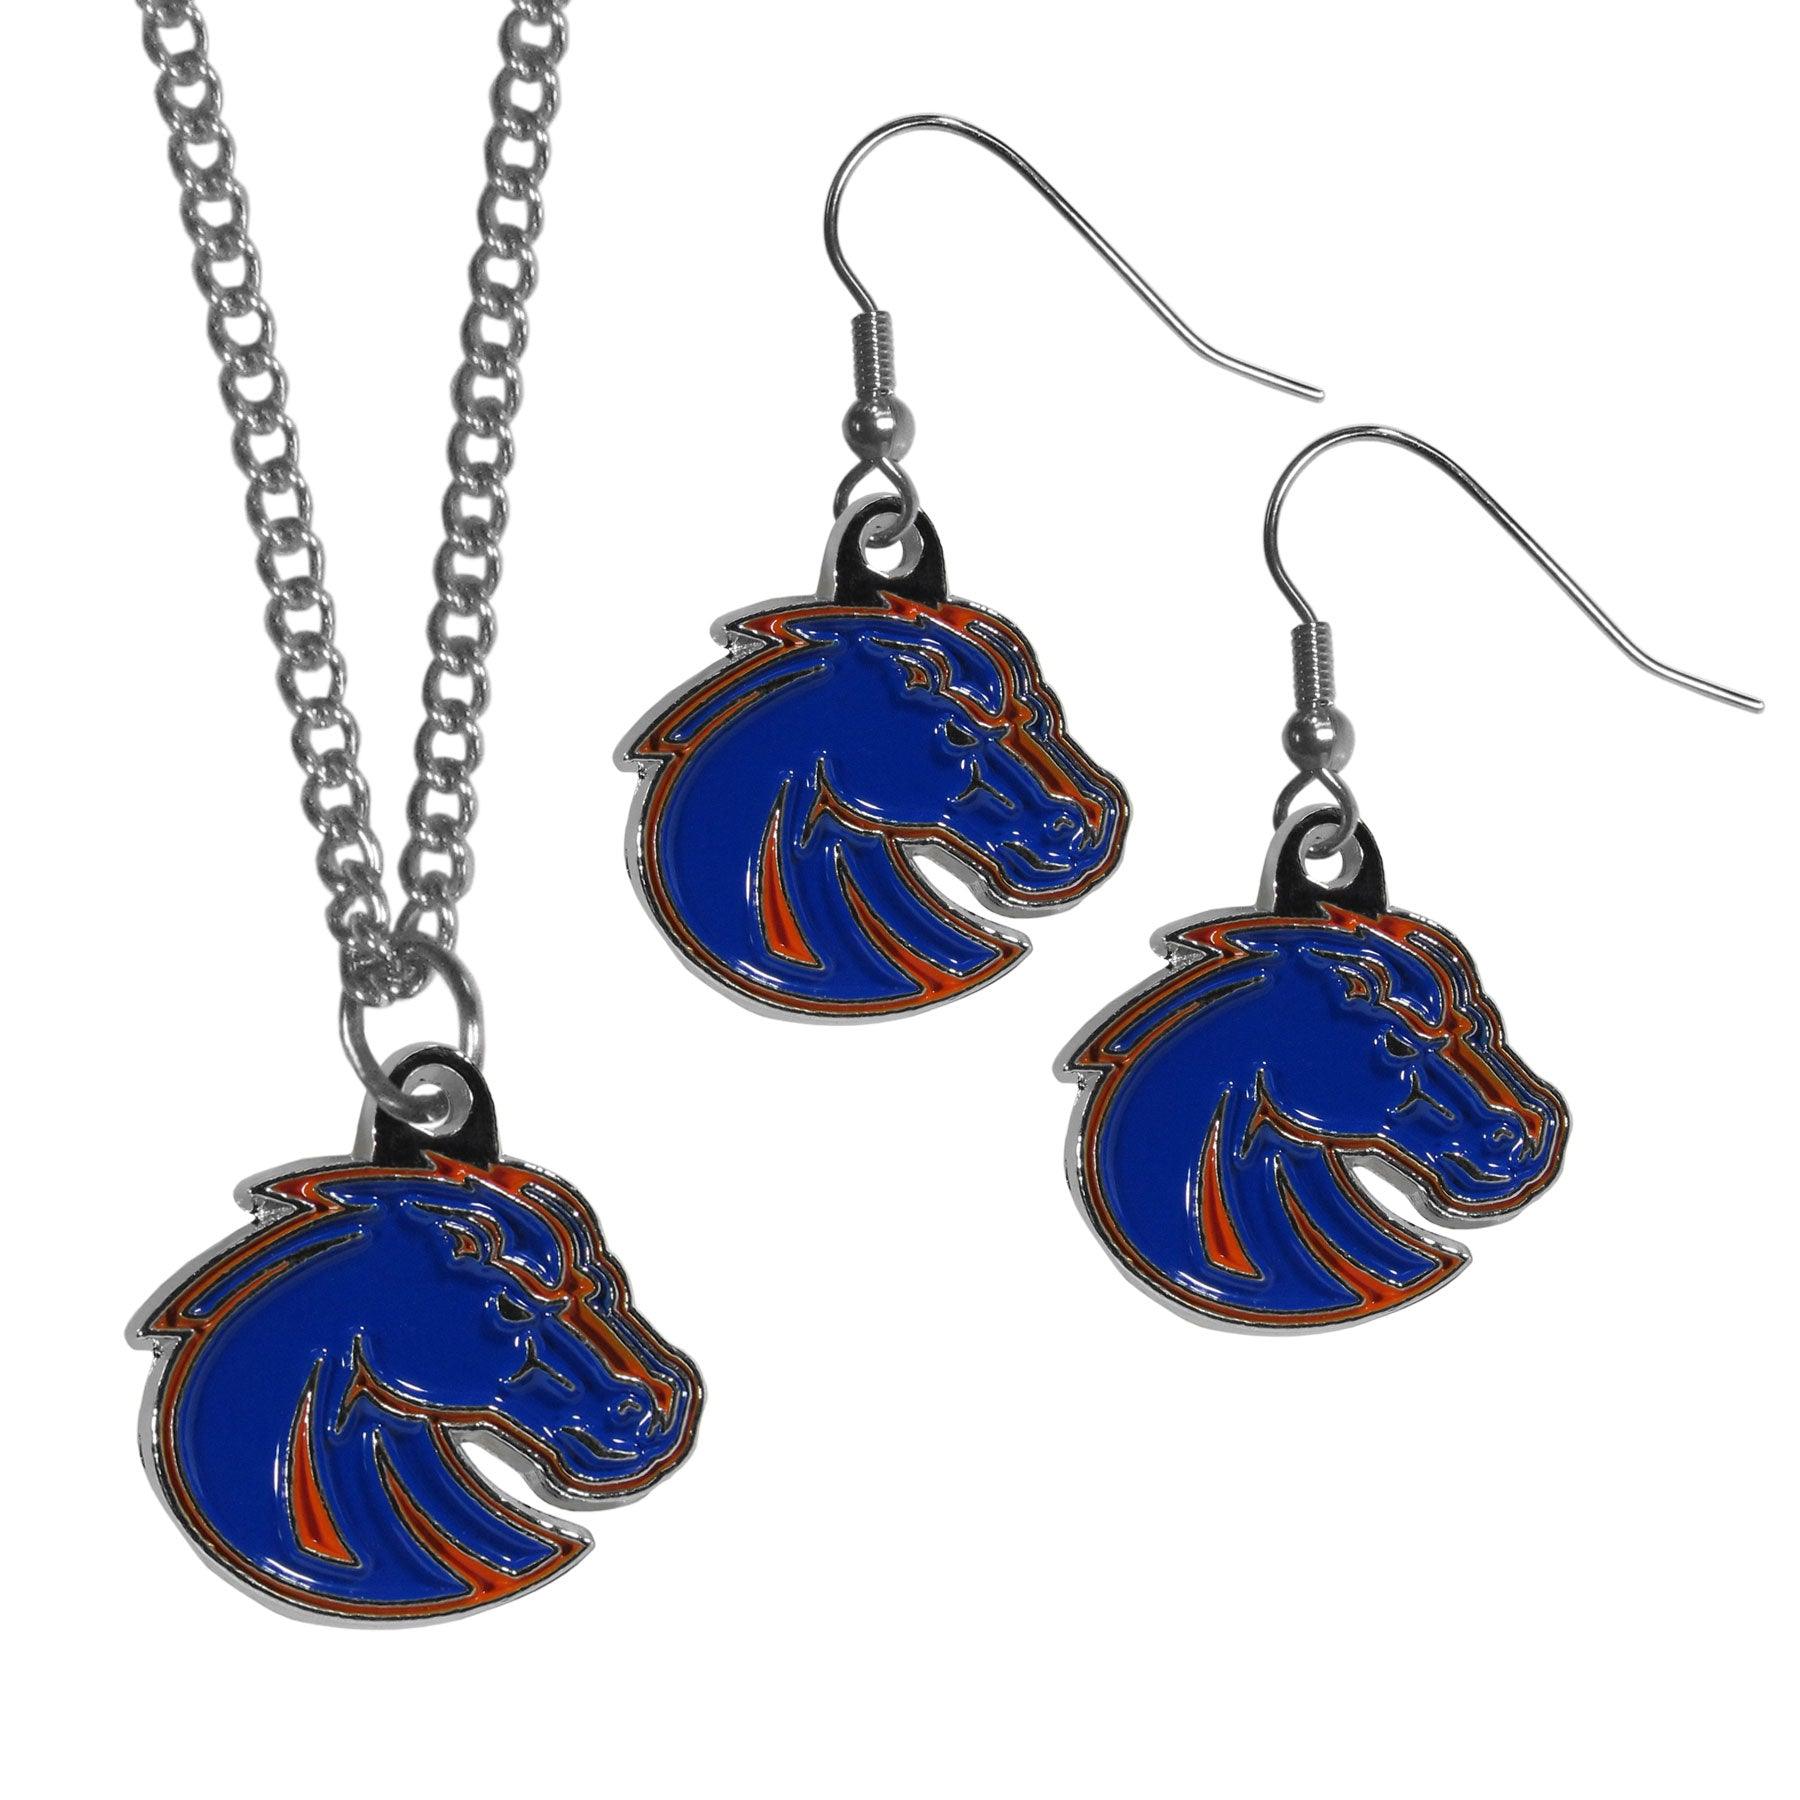 Boise St. Broncos Dangle Earrings and Chain Necklace Set - Flyclothing LLC